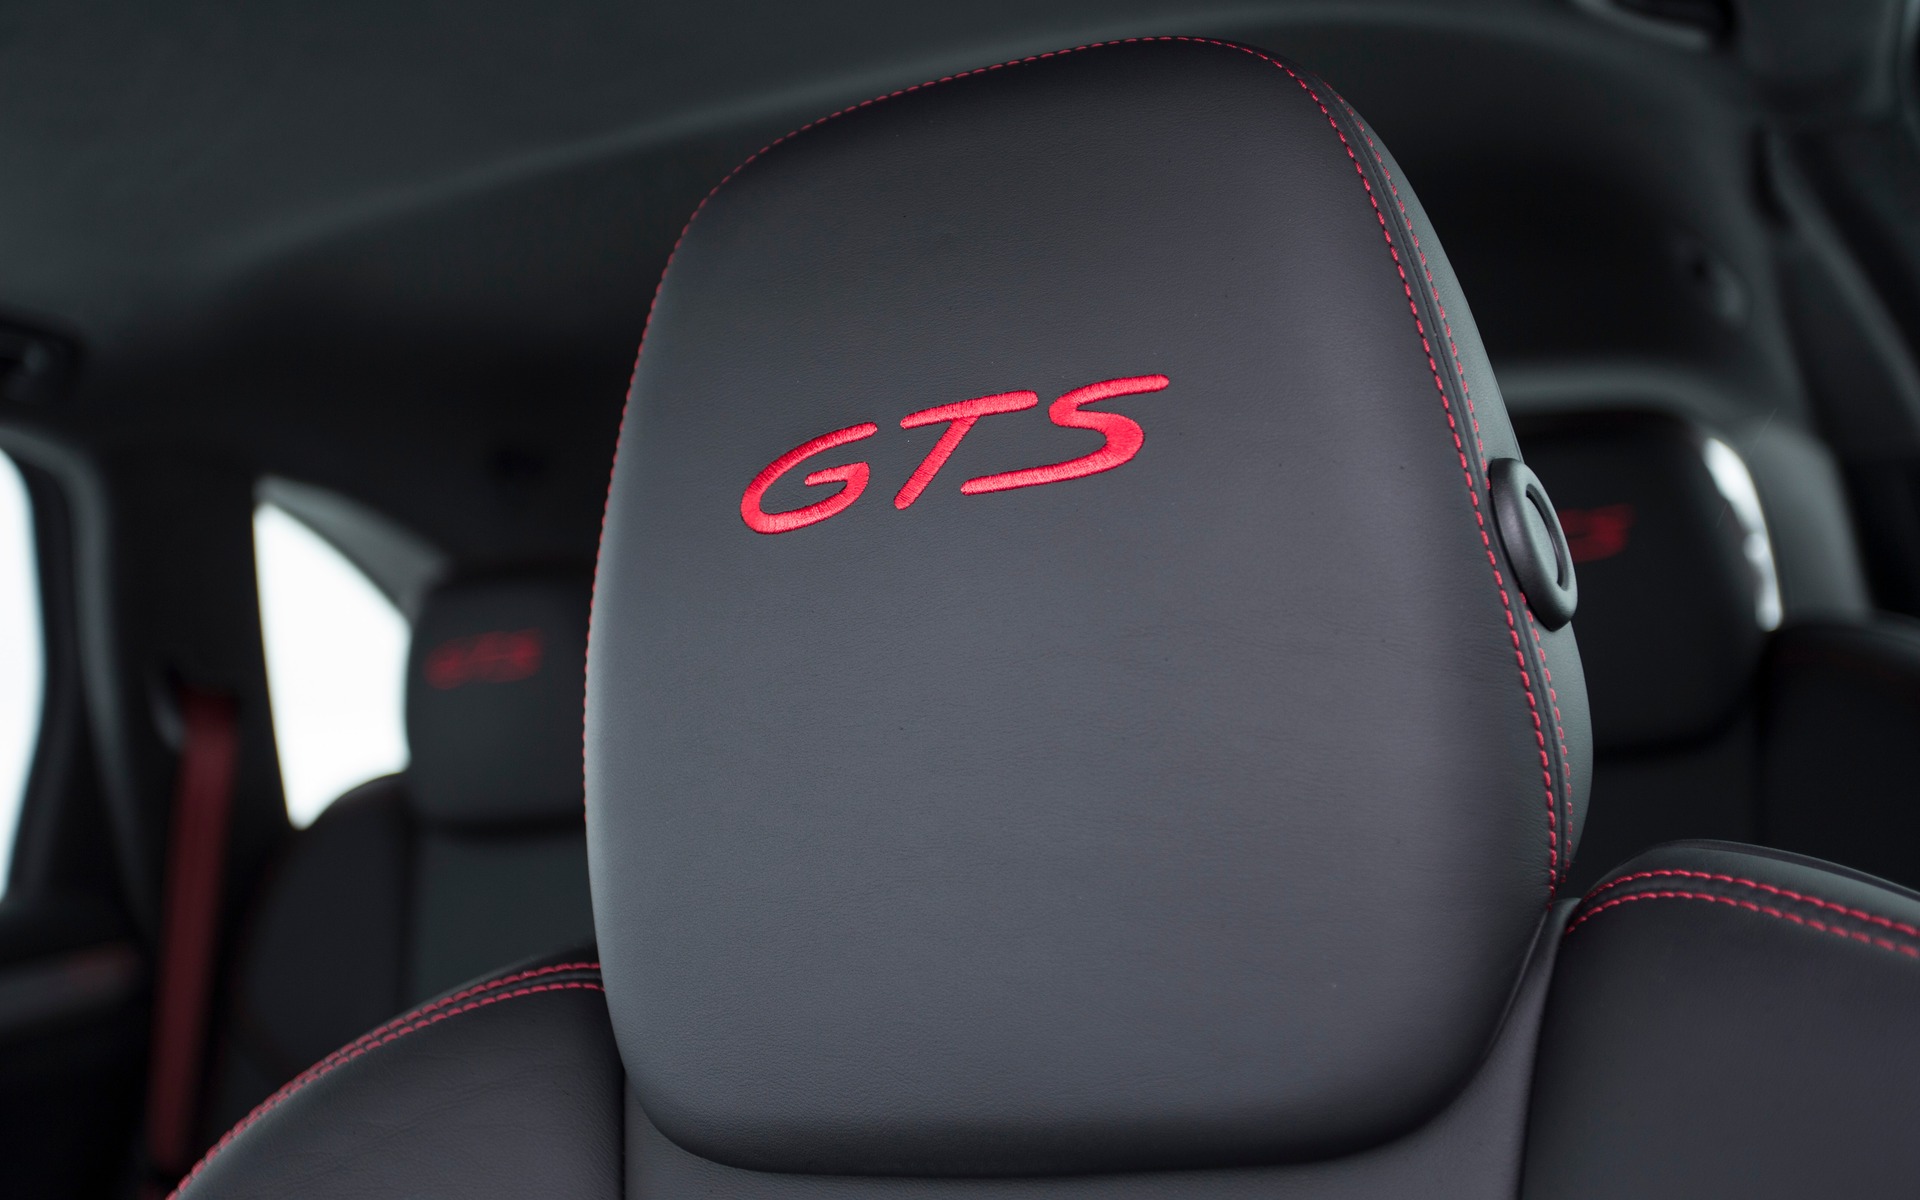 Red stitching and GTS logo on the seats.